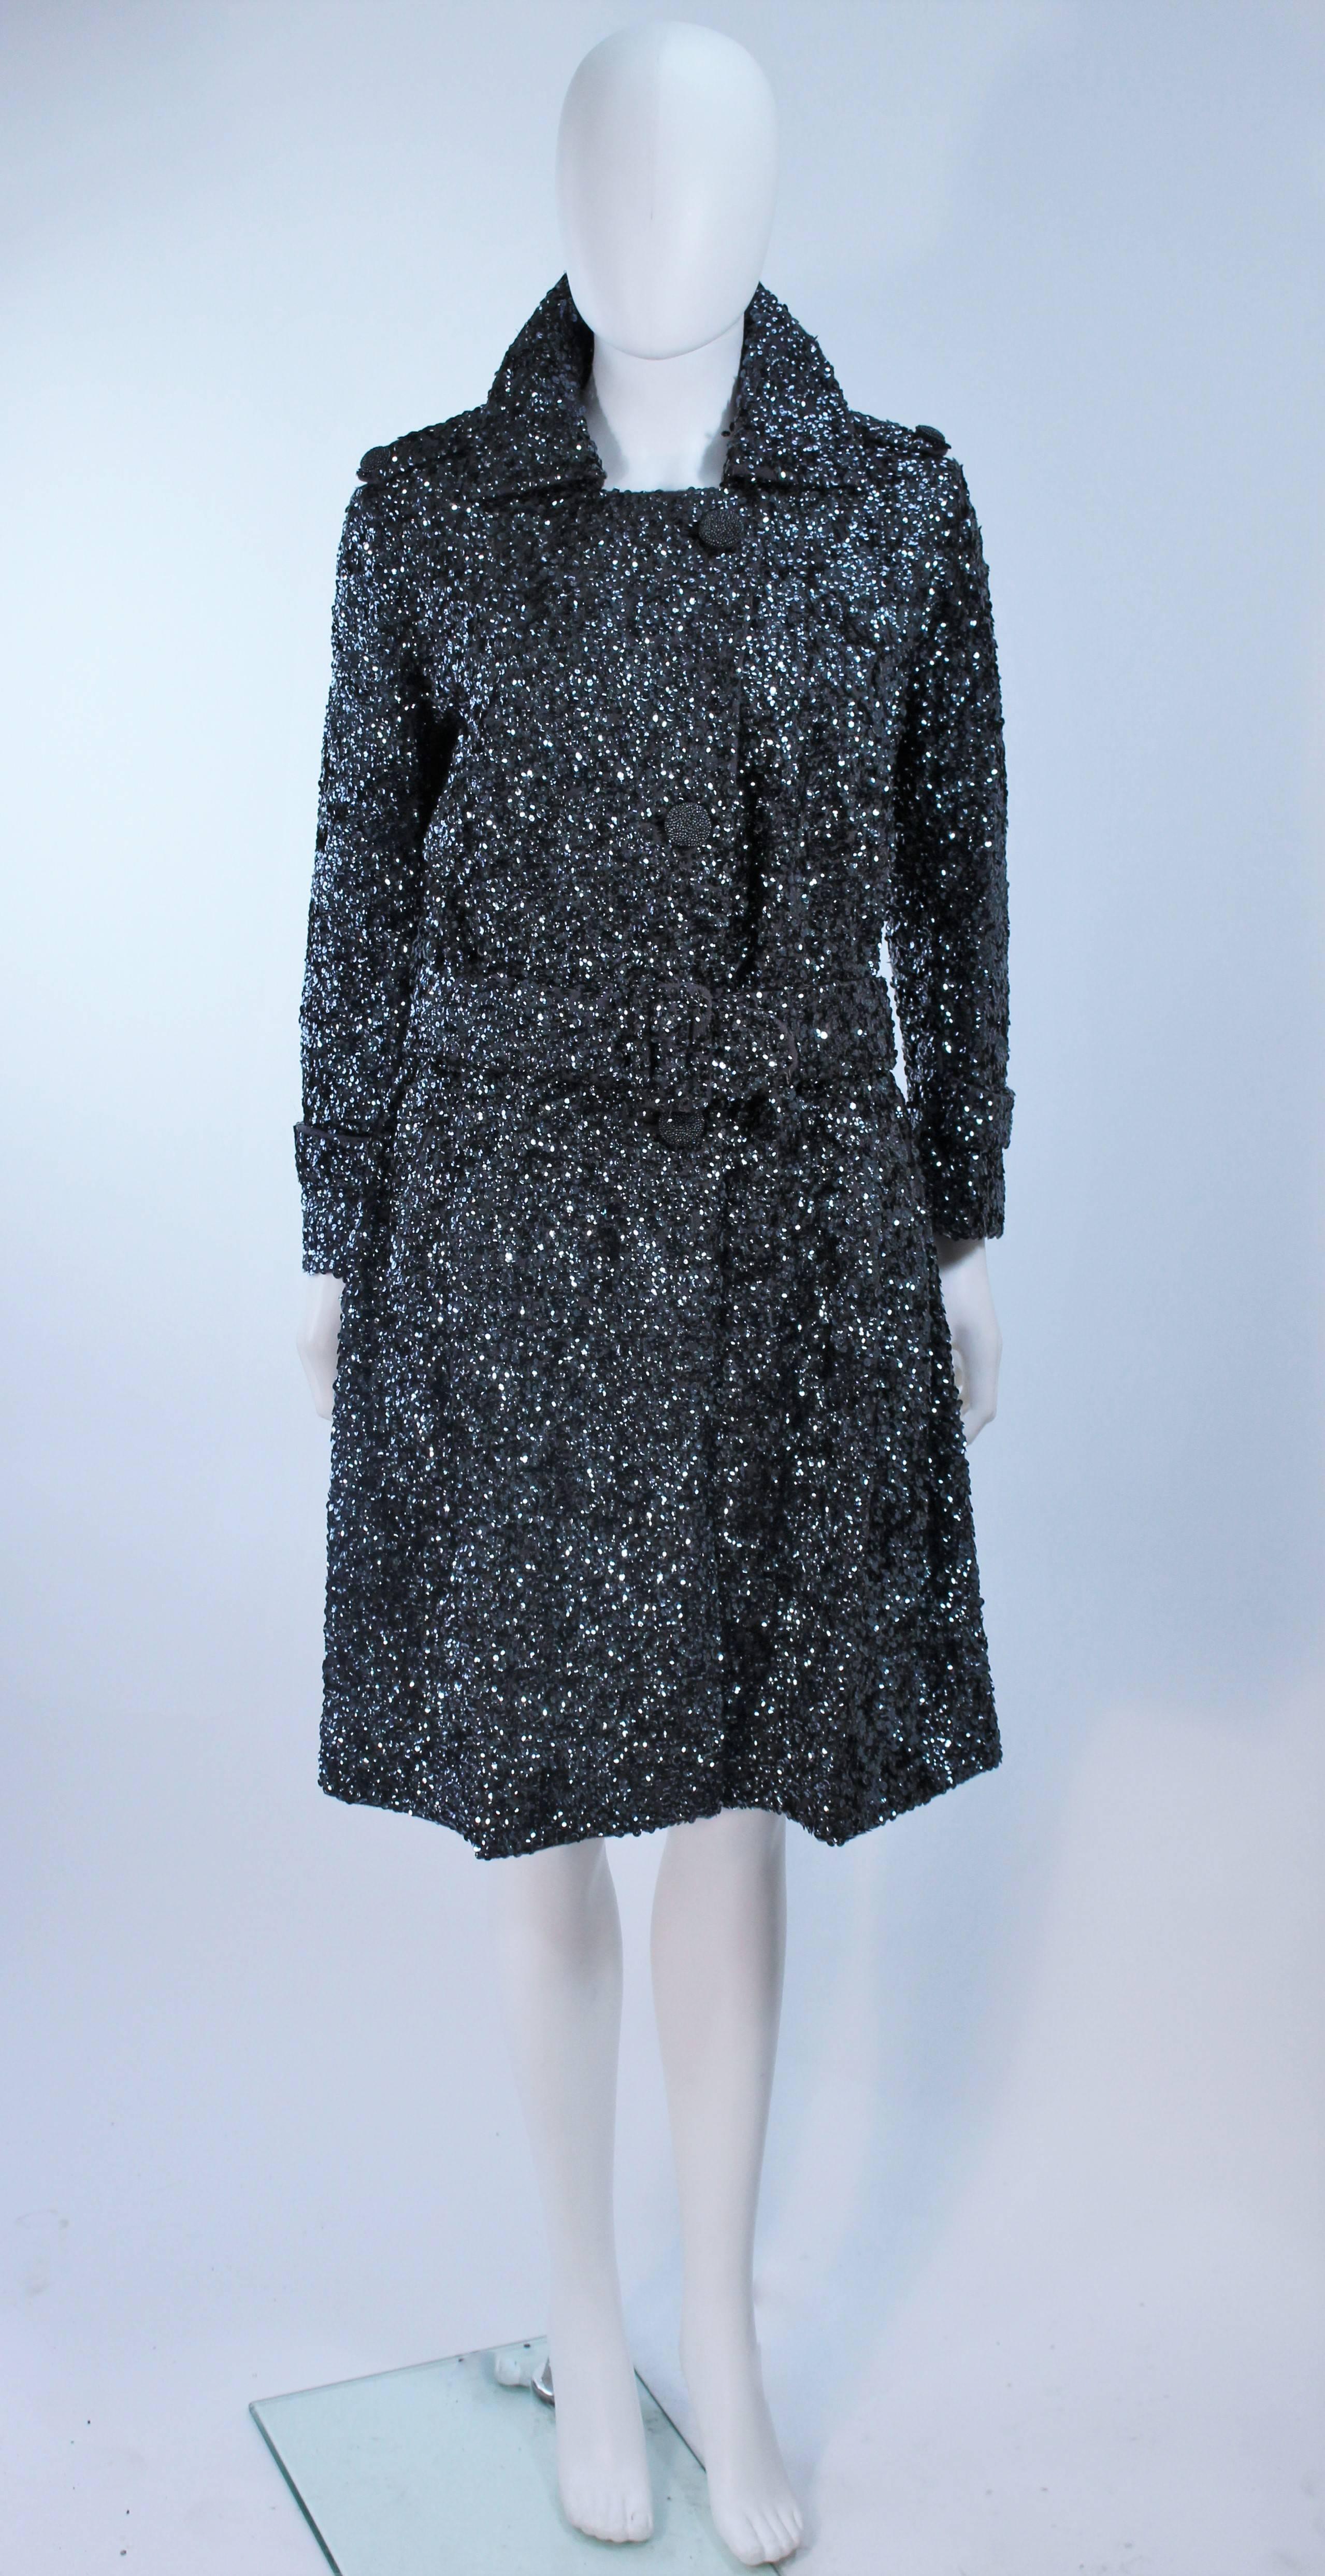  This coat is composed of a sequin wool in a silver color with gunmetal hue sequins. There are center front snap closures and the same style buttons at the shoulders as accents. A great vintage design, needs sequin restoration on the collar and